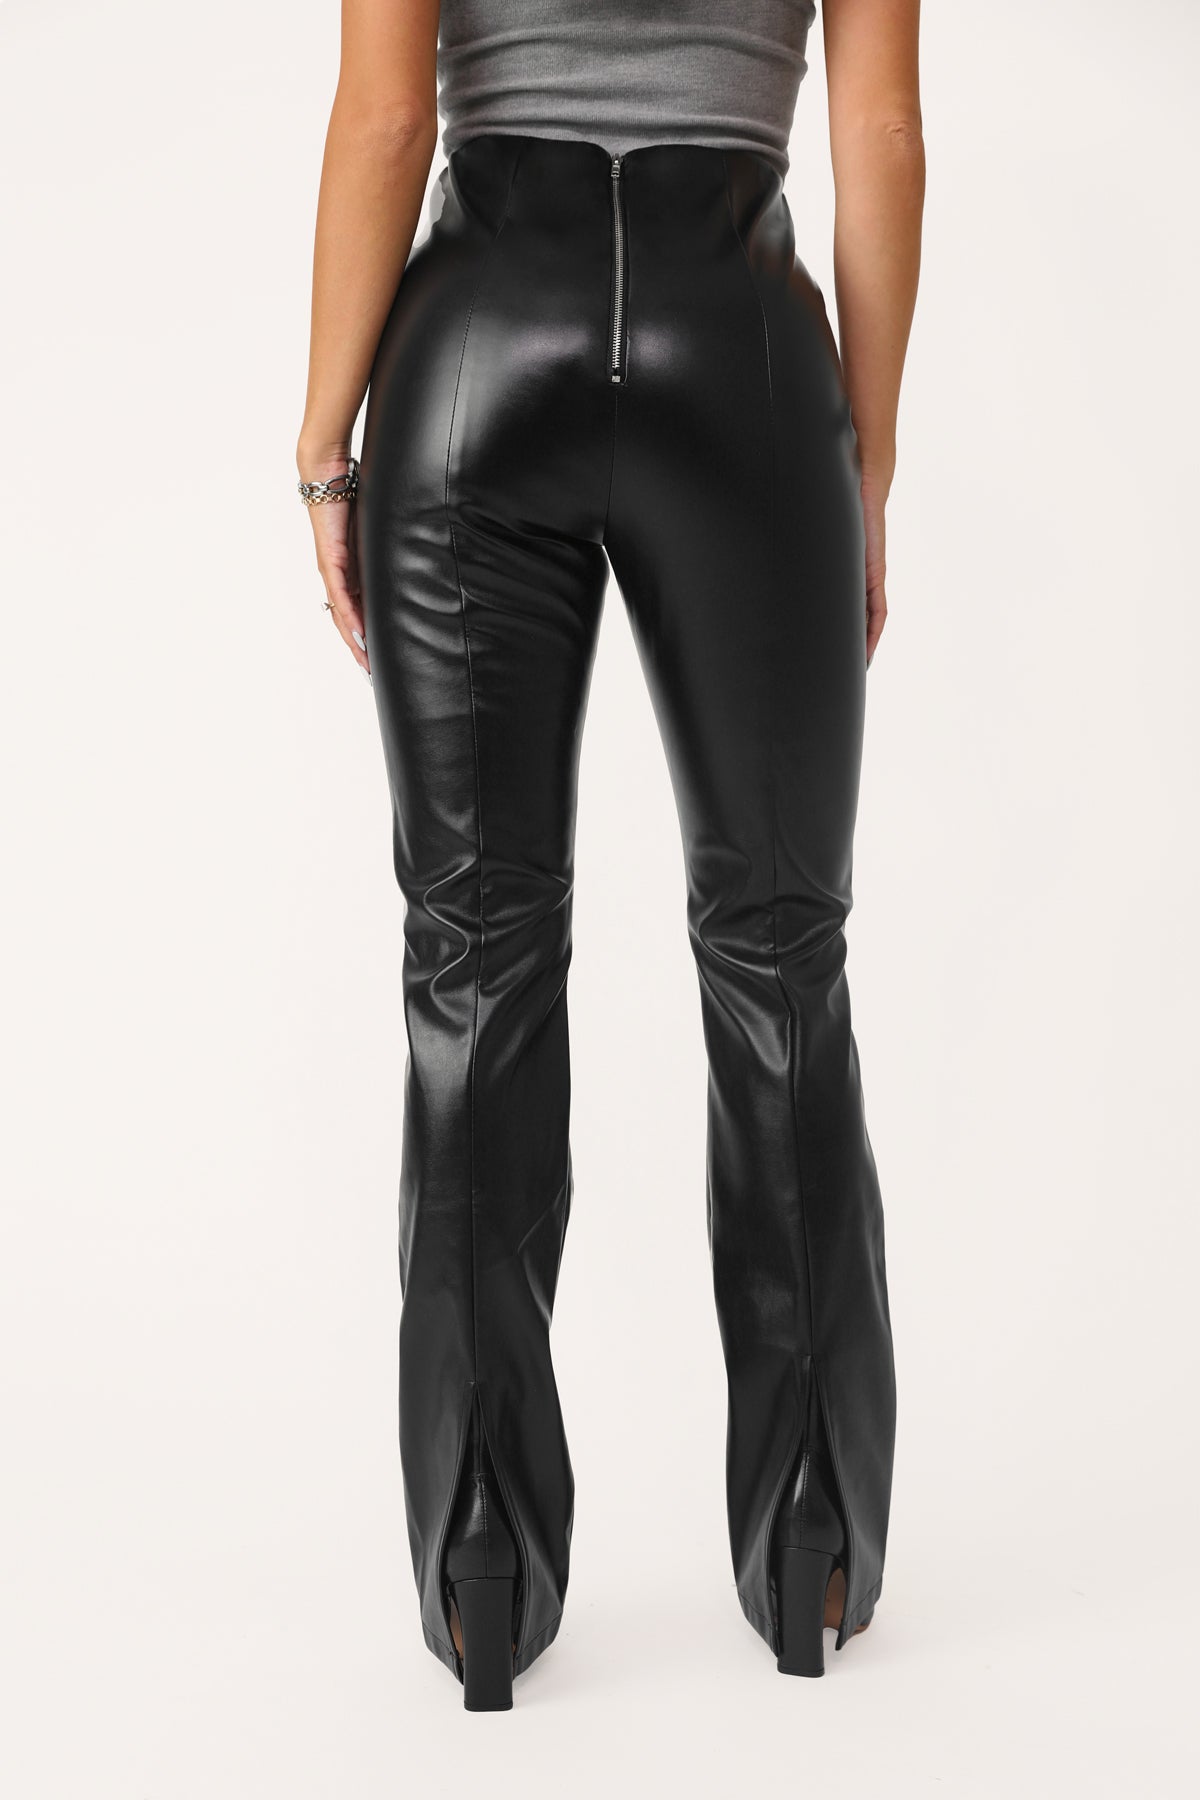 MODEL WEARING THE RIZZO BLACK FAUX LEATHER FLARE PANT